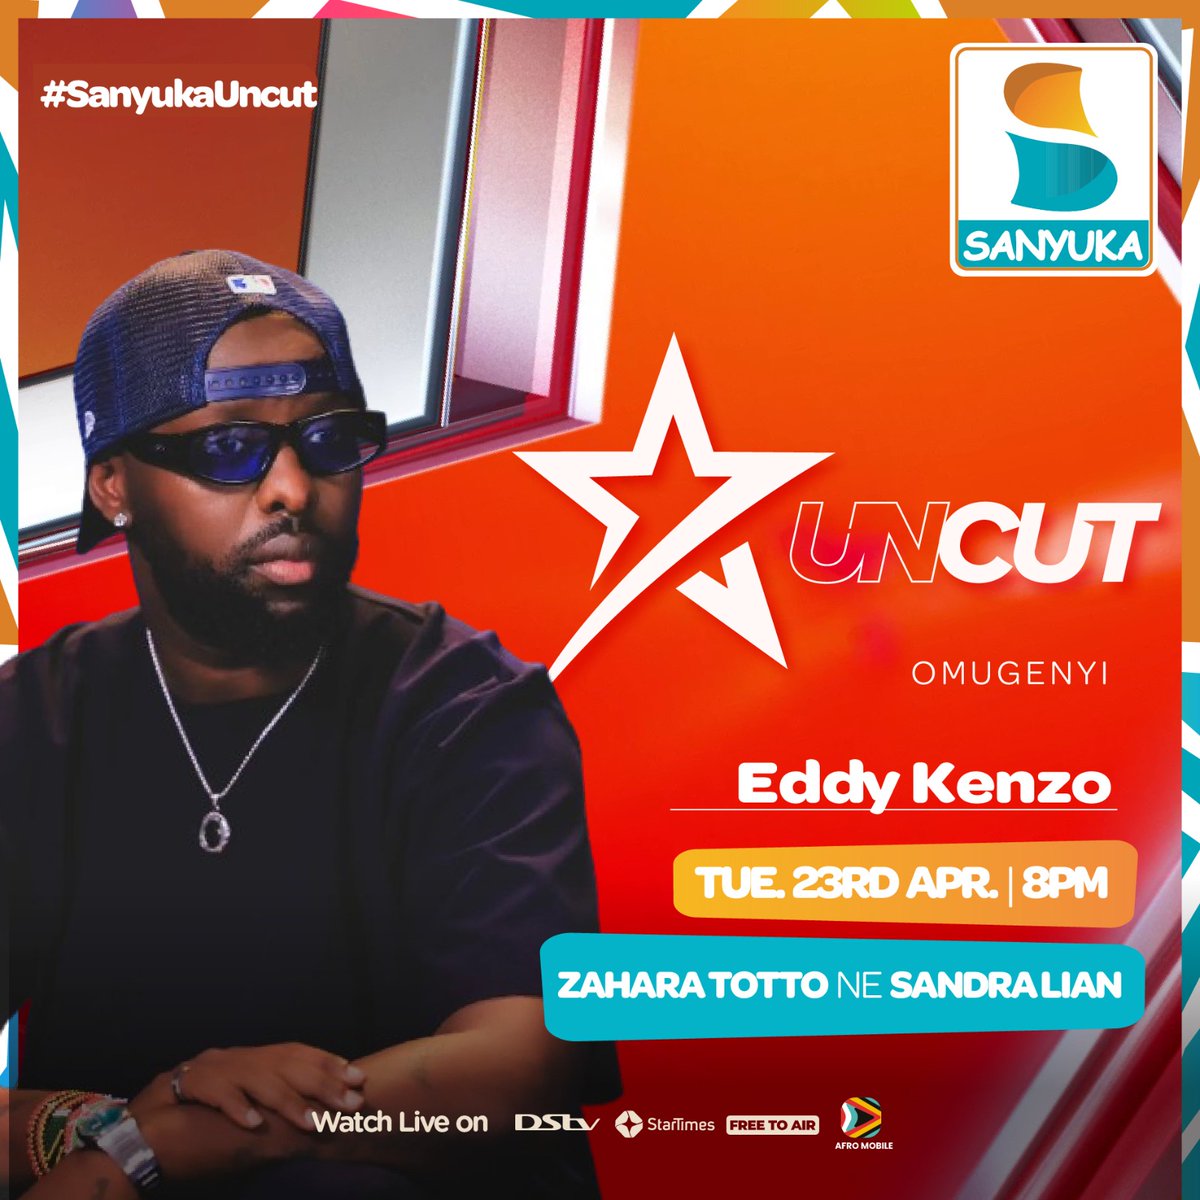 Don't miss today's #SanyukaUnCut show at 8pm with @SandraLian6 and @hellenmenta, featuring our special guest Eddy Kenzo. What questions would you like to ask him? #SanyukaUpdates